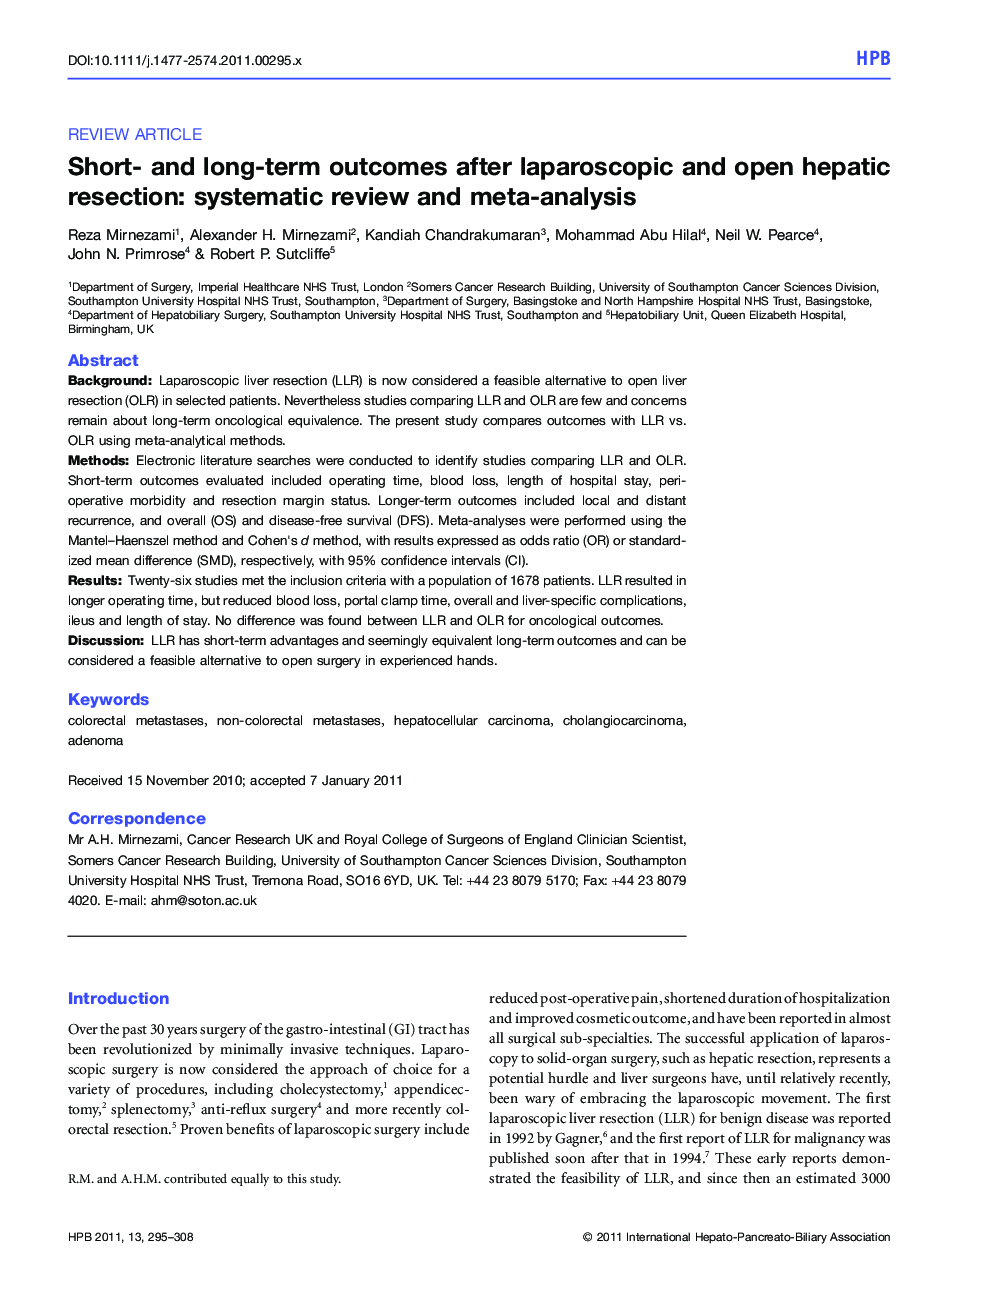 Short- and long-term outcomes after laparoscopic and open hepatic resection: systematic review and meta-analysis